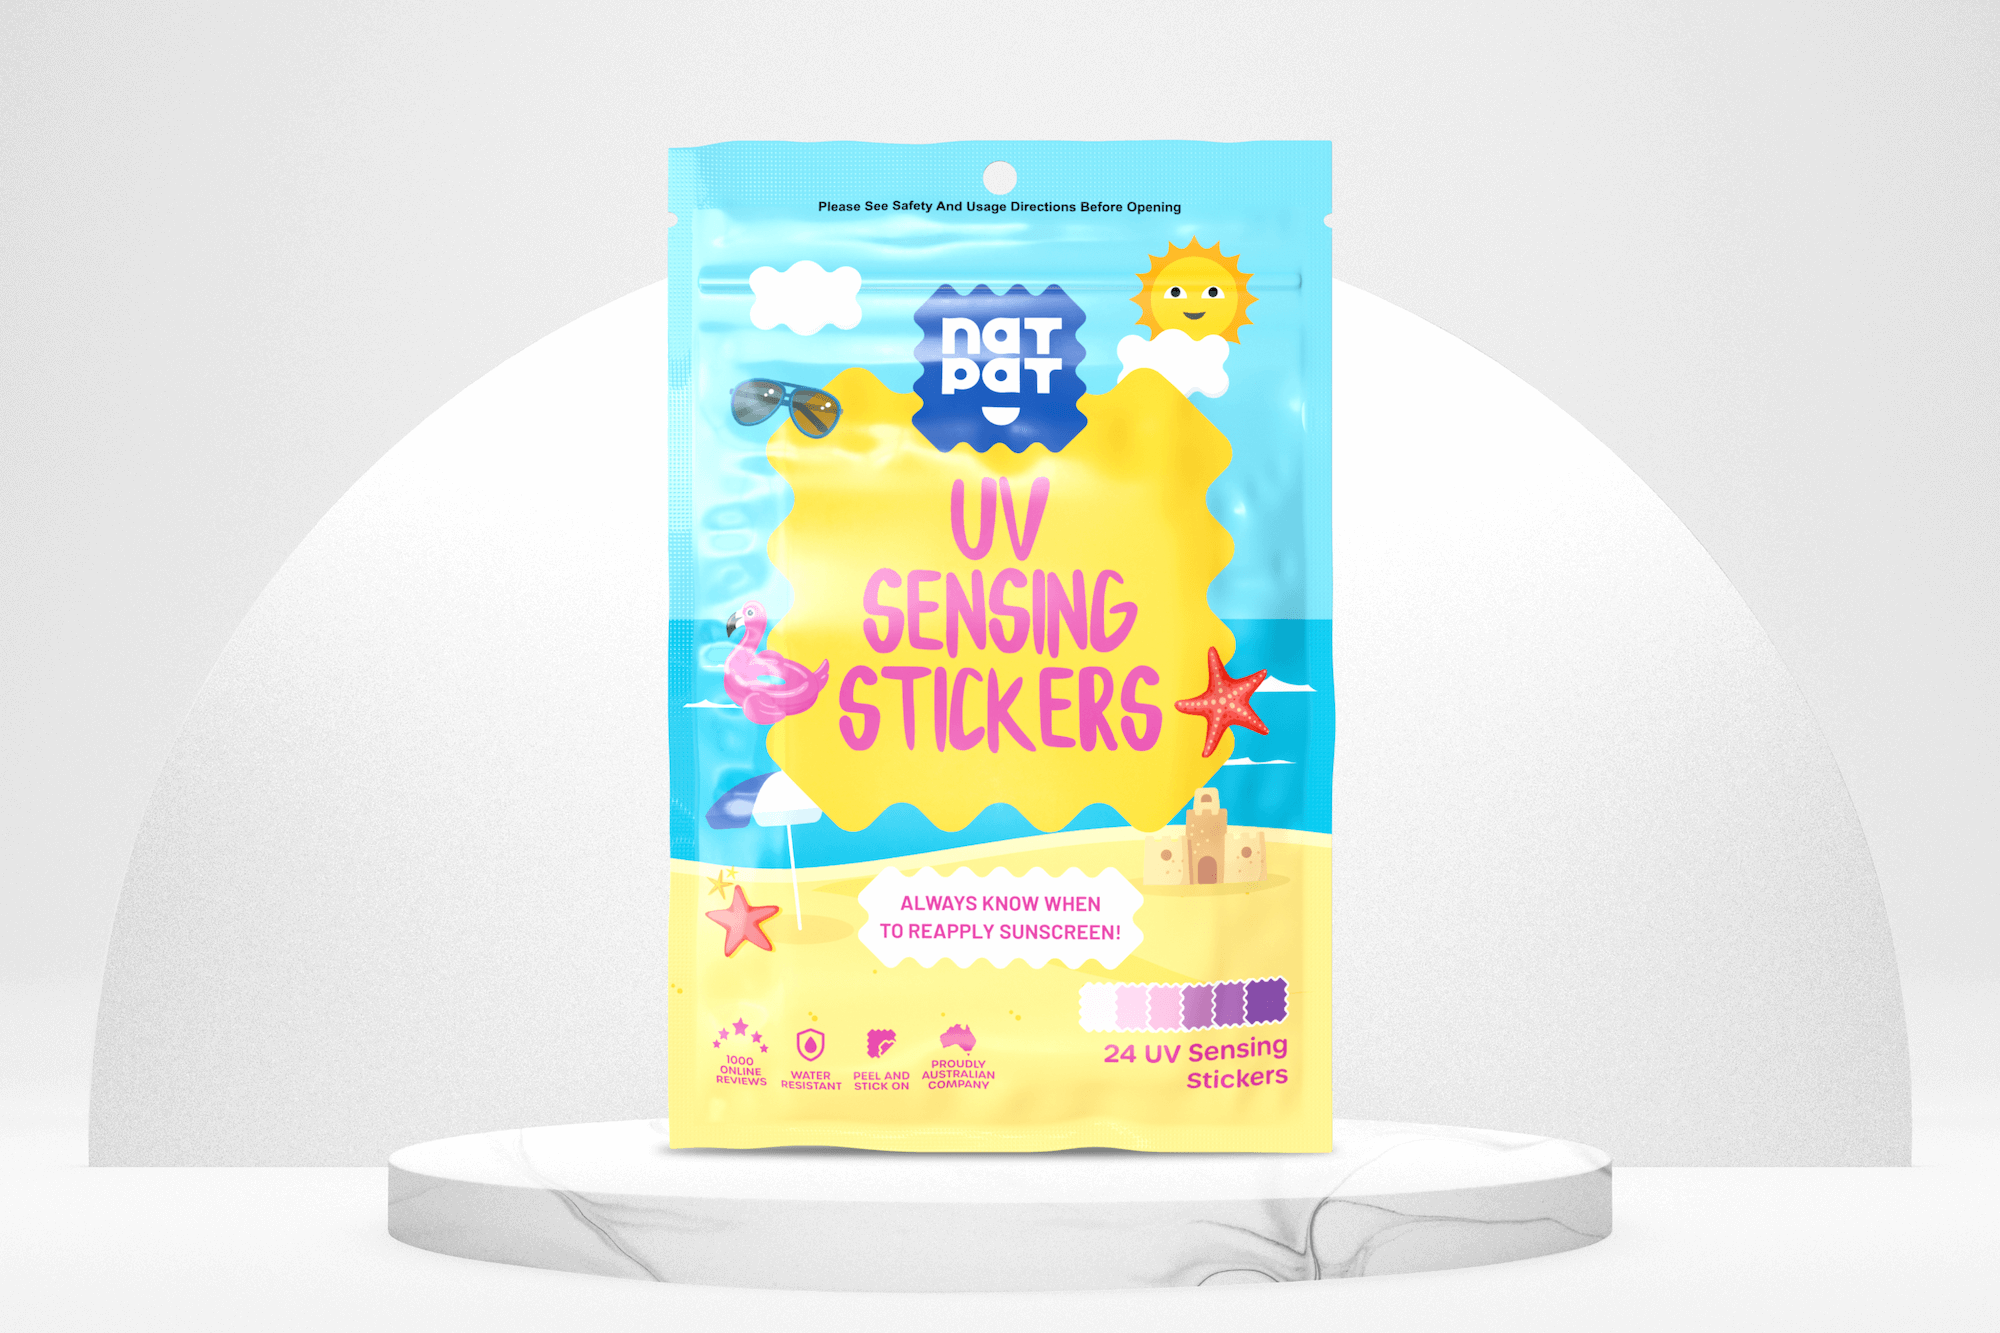 SunnyPatch UV-Detecting Stickers